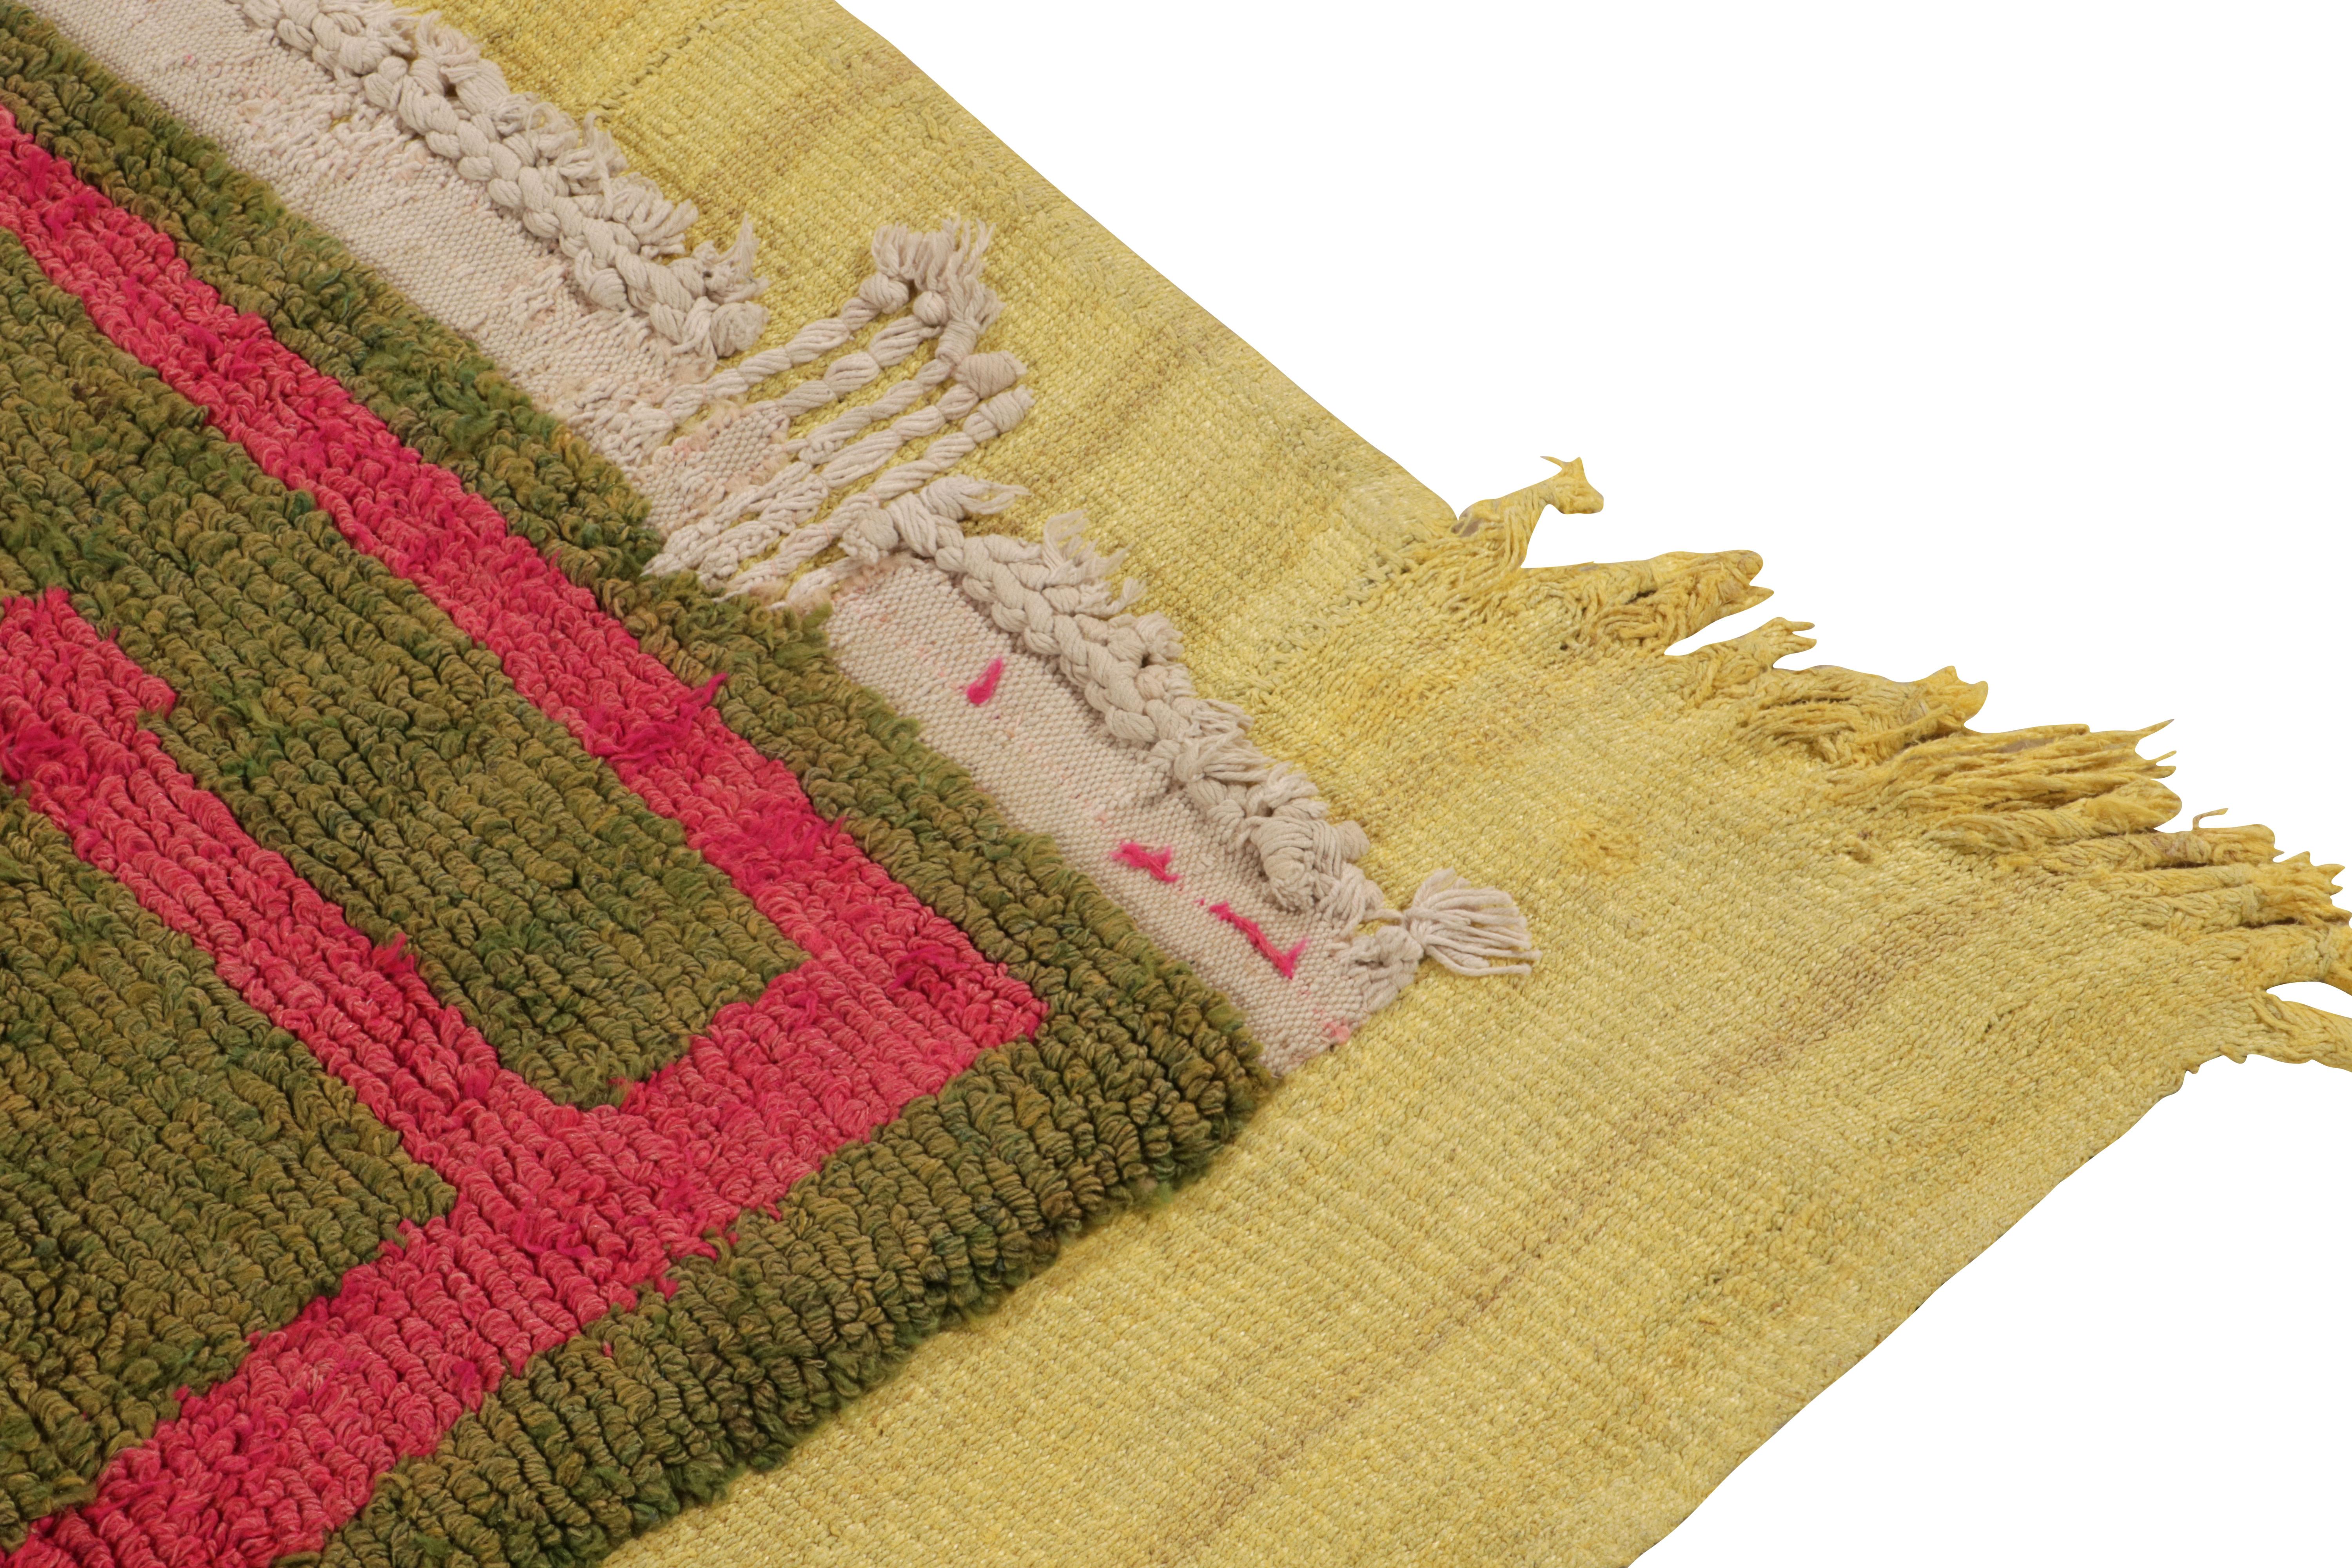 Vintage Midcentury Geometric Red, Green Layered Wool Flat-Weave by Rug & Kilim In Good Condition For Sale In Long Island City, NY